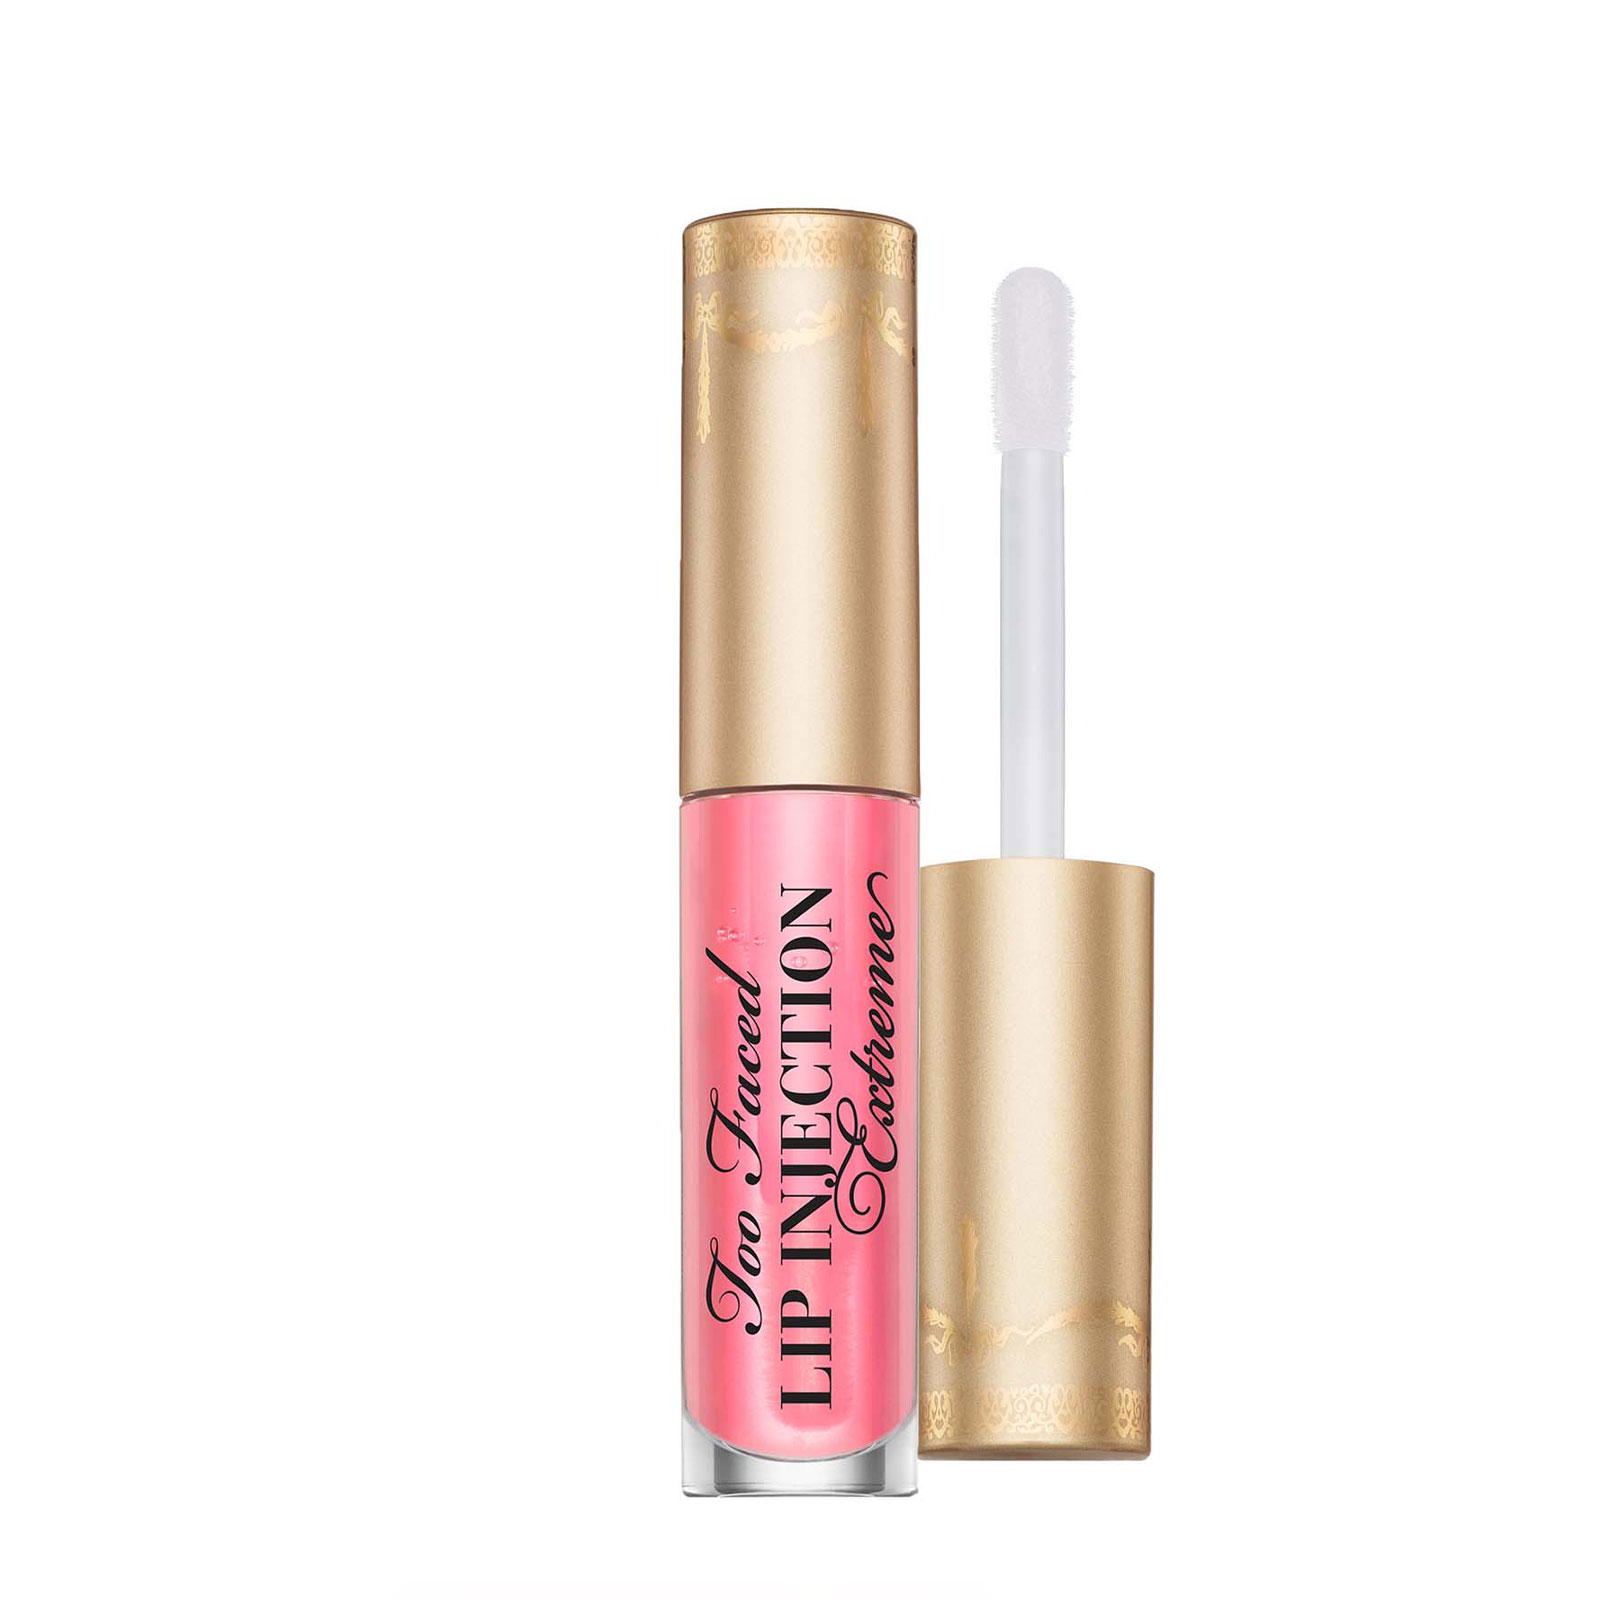 Too Faced Lip Injection Extreme Doll Size Plumping Lip Gloss 2.8G Bubblegum Yum